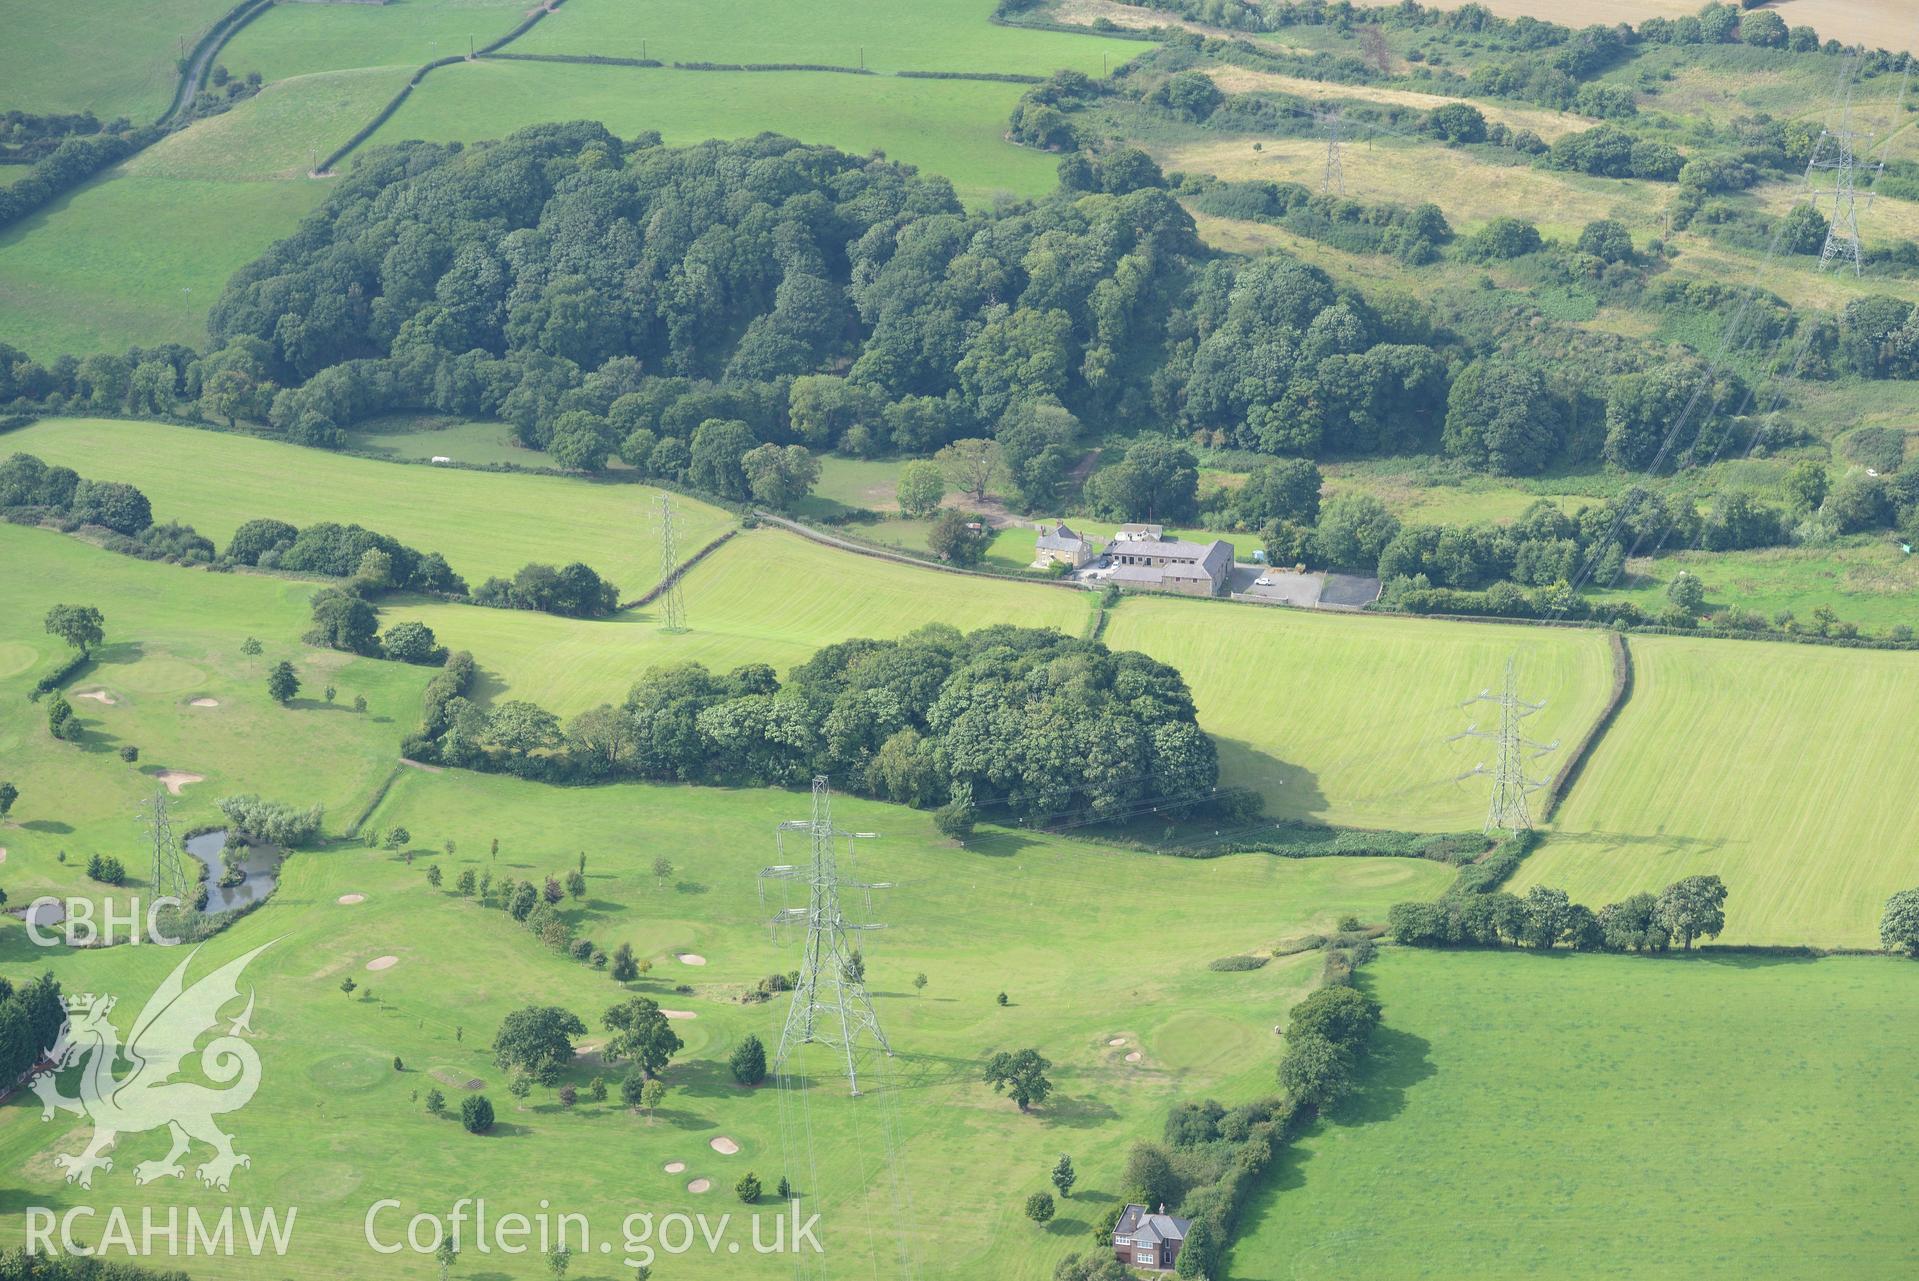 Bryn-y-Cwm motte, near Flint. Oblique aerial photograph taken during the Royal Commission's programme of archaeological aerial reconnaissance by Toby Driver on 11th September 2015.